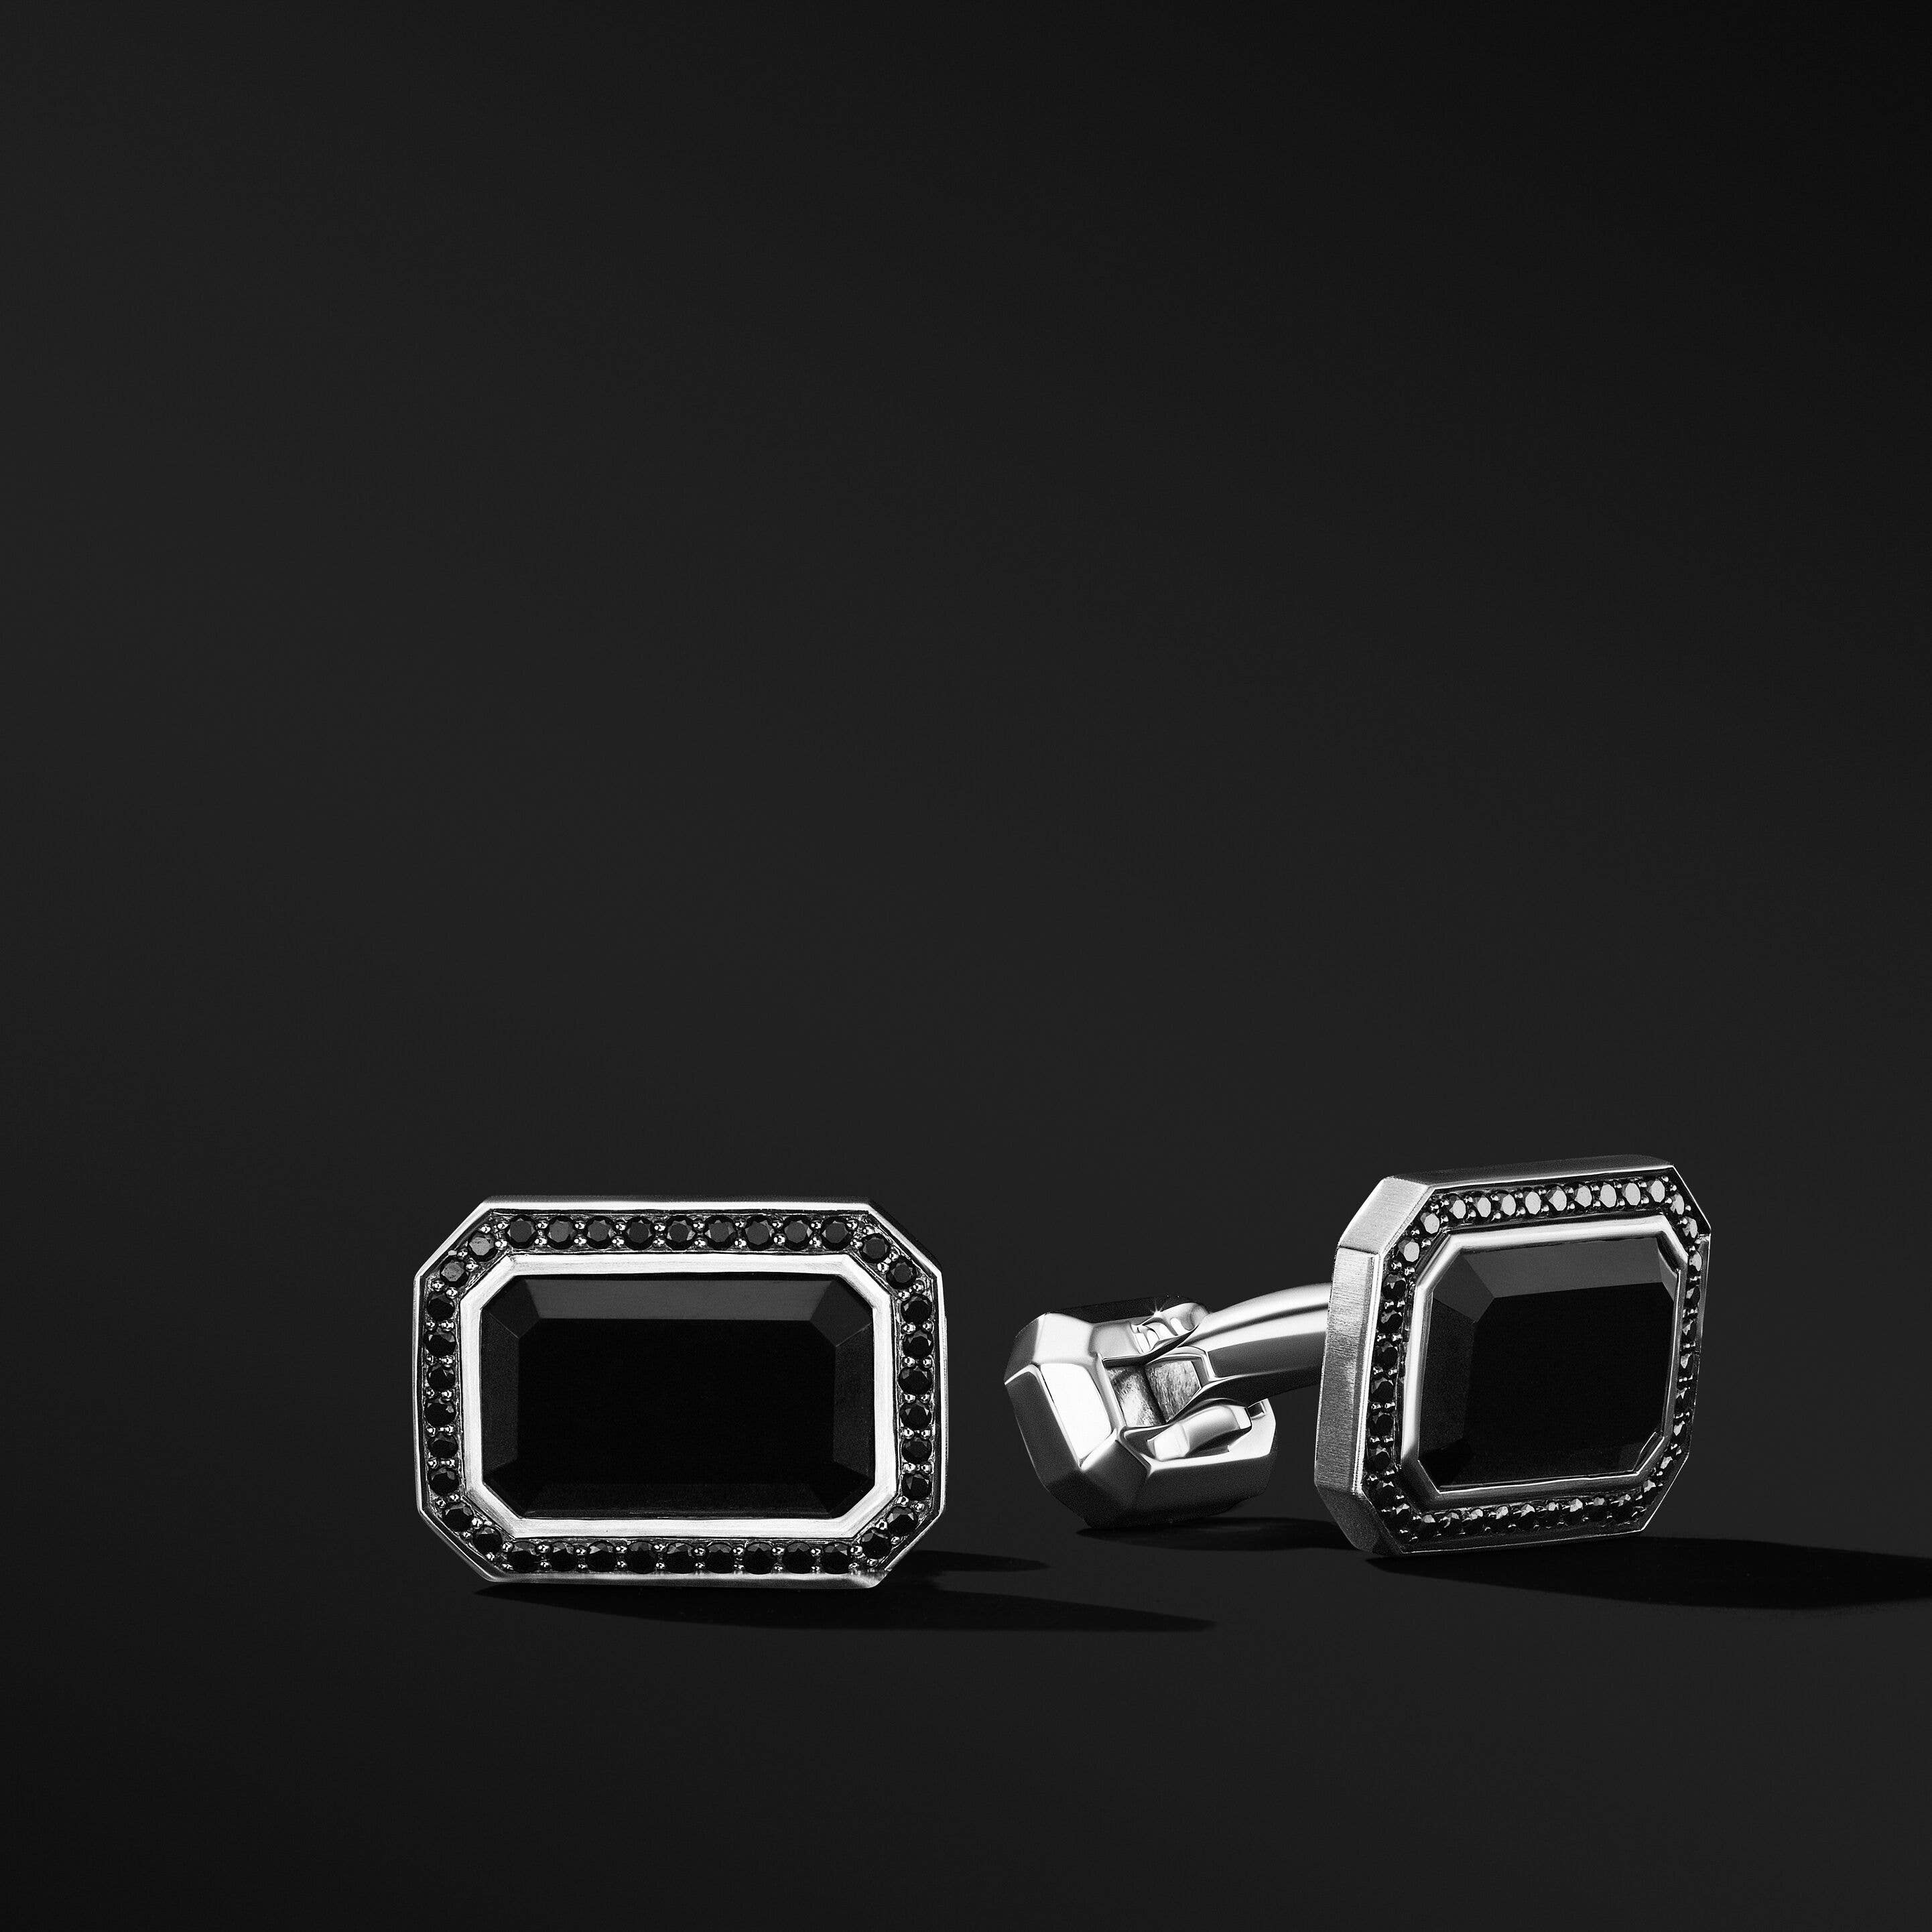 Heirloom Cufflinks in Sterling Silver with Black Onyx and Pavé Black Diamonds